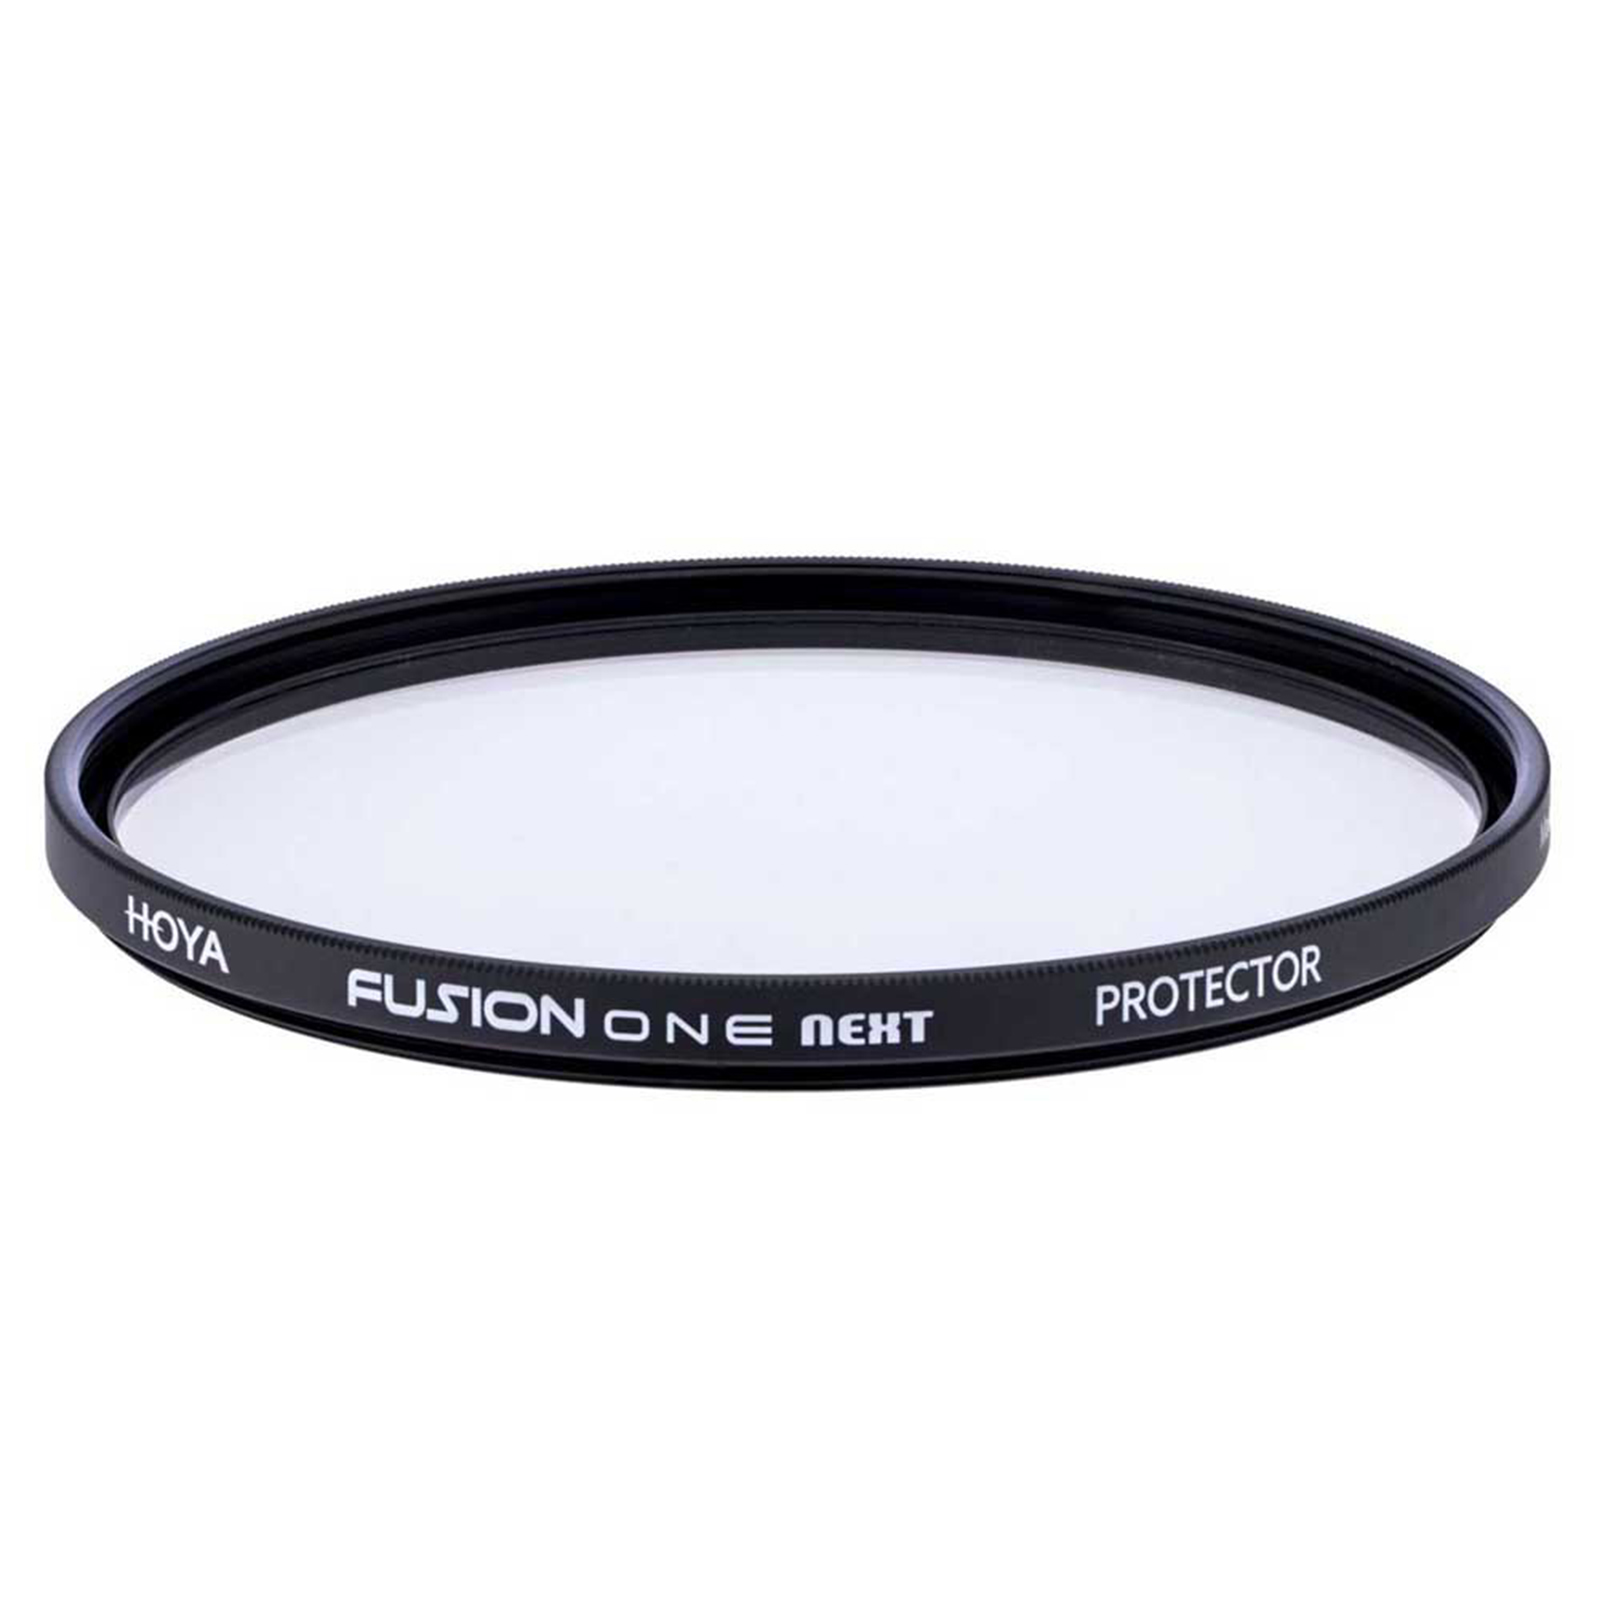 Image of Hoya 62mm Fusion AS Next Protector Filter